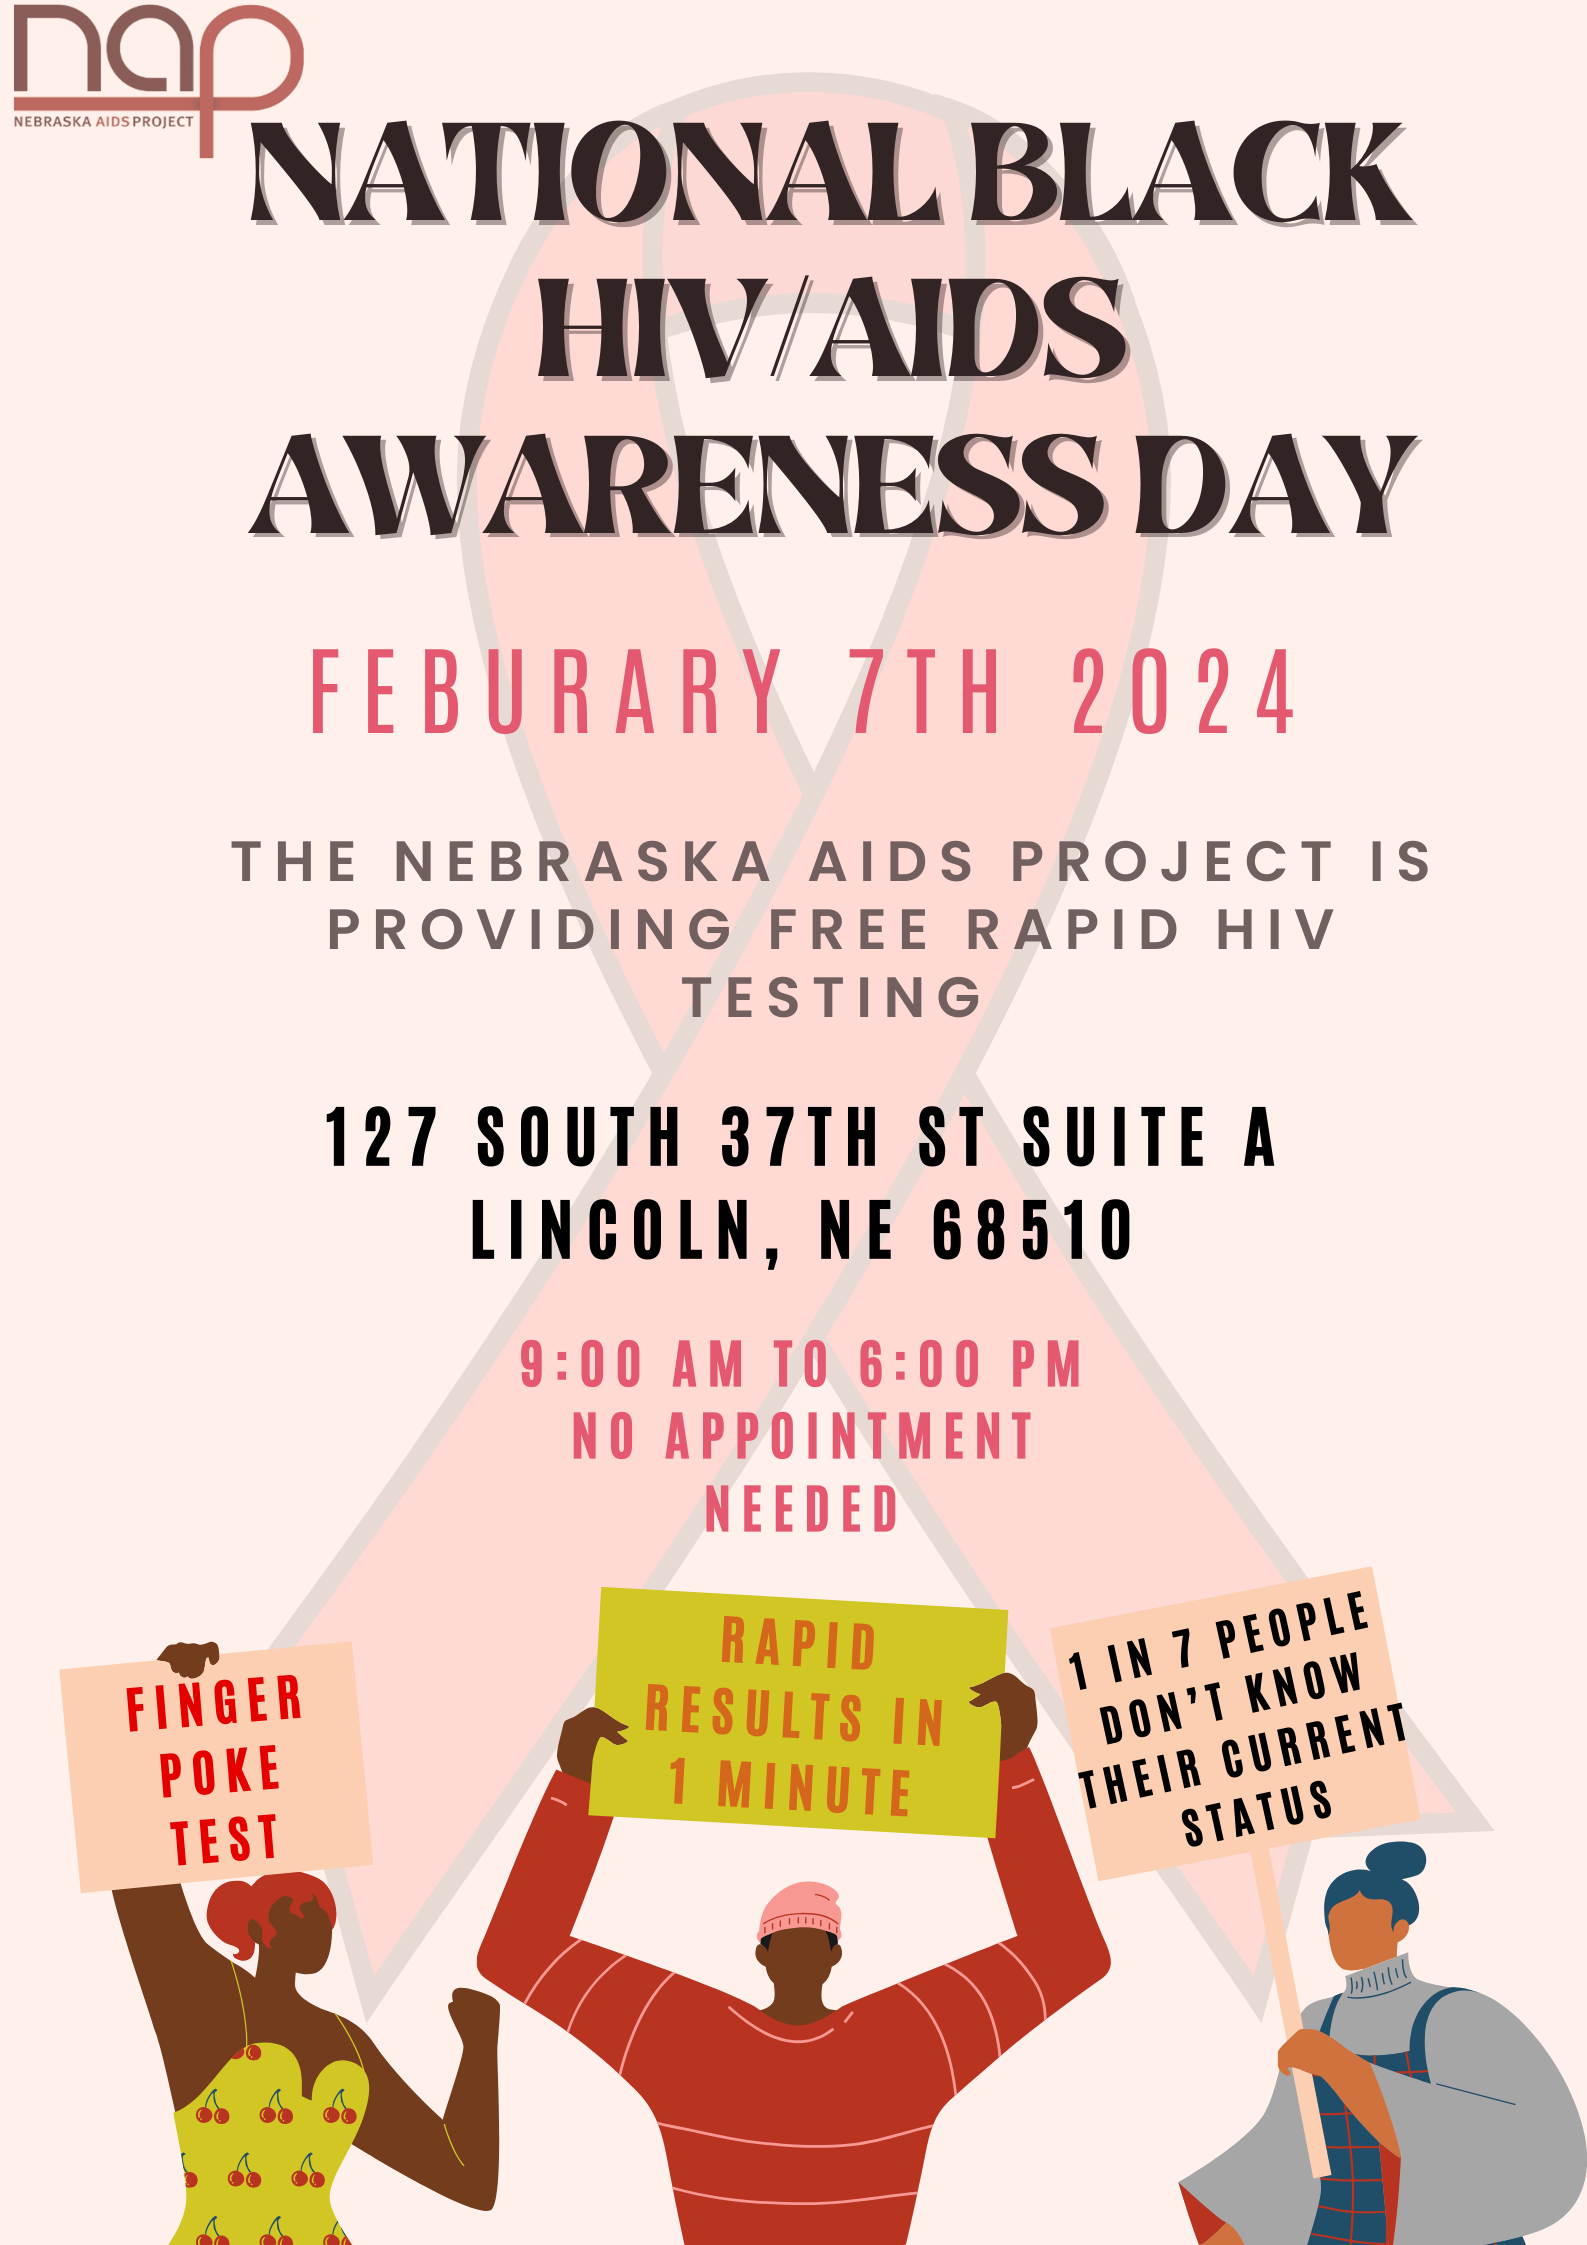 National Black HIV/AIDS Awareness Day February 7, 2024 The Nebraska AIDS Project is providing free rapid HIV testing 127 S 37th St Suite A Lincoln, NE 68510